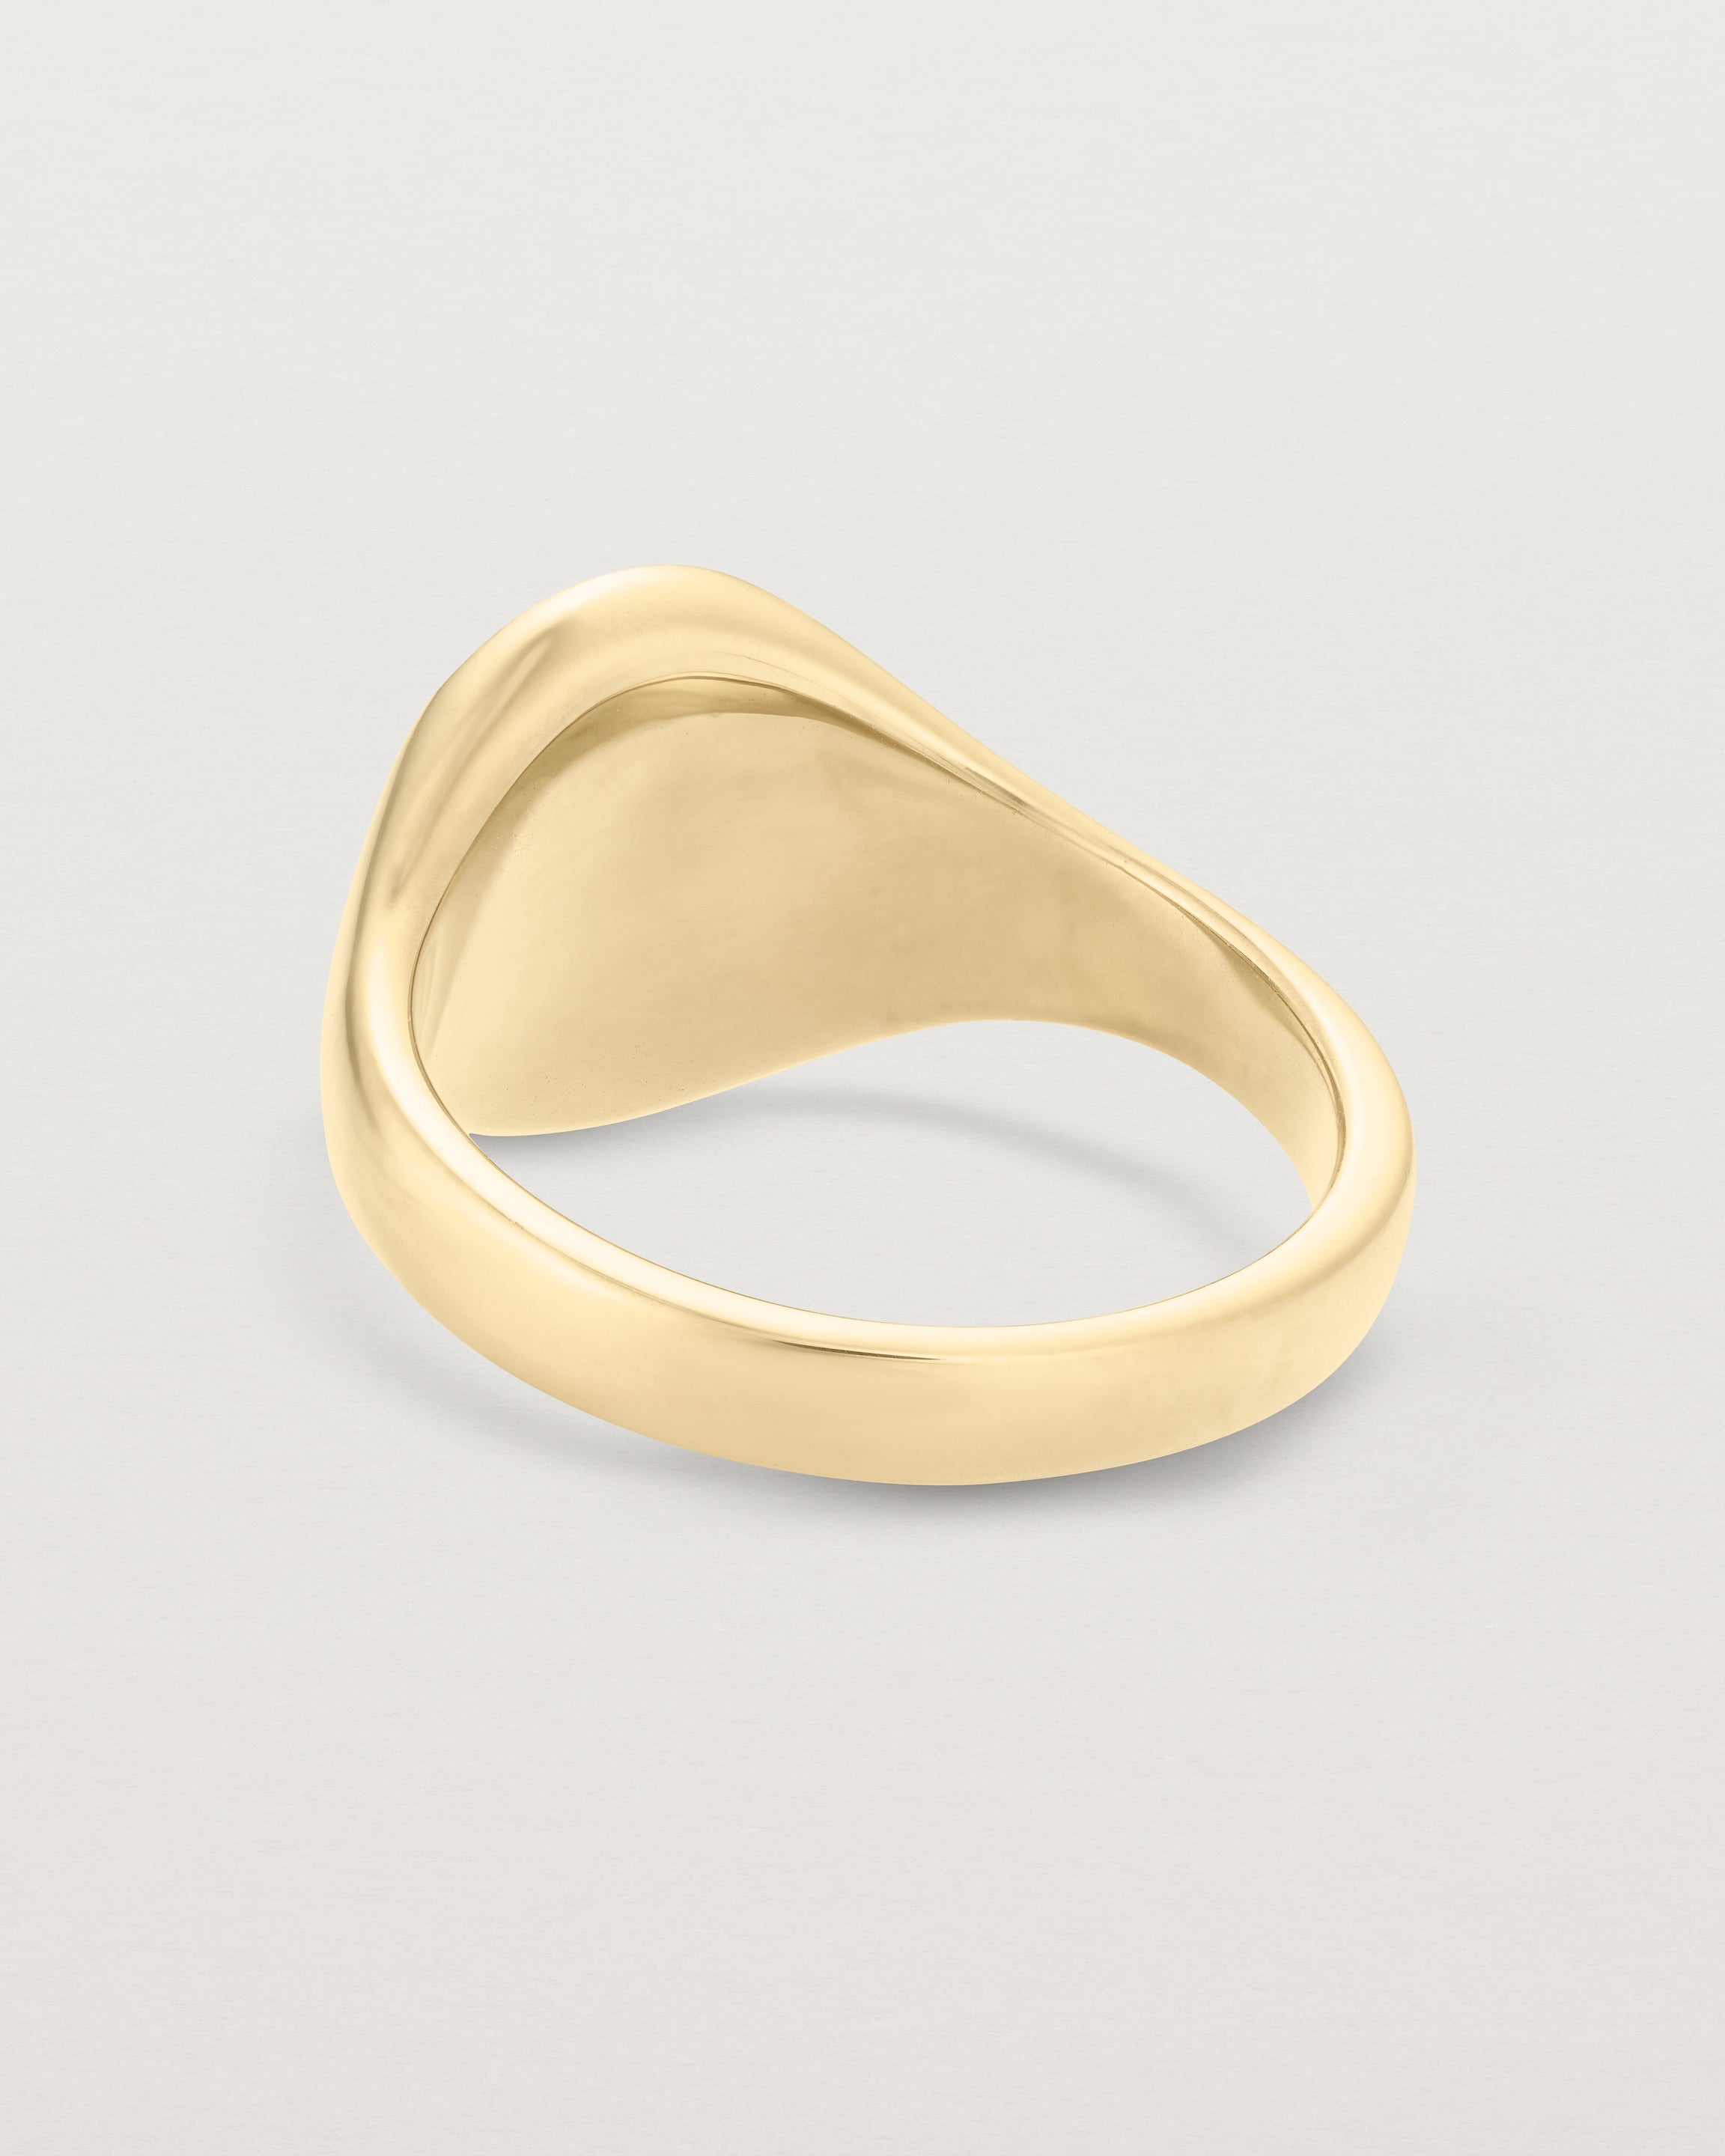 Back view of the Arden Signet Ring | Millgrain in yellow gold.